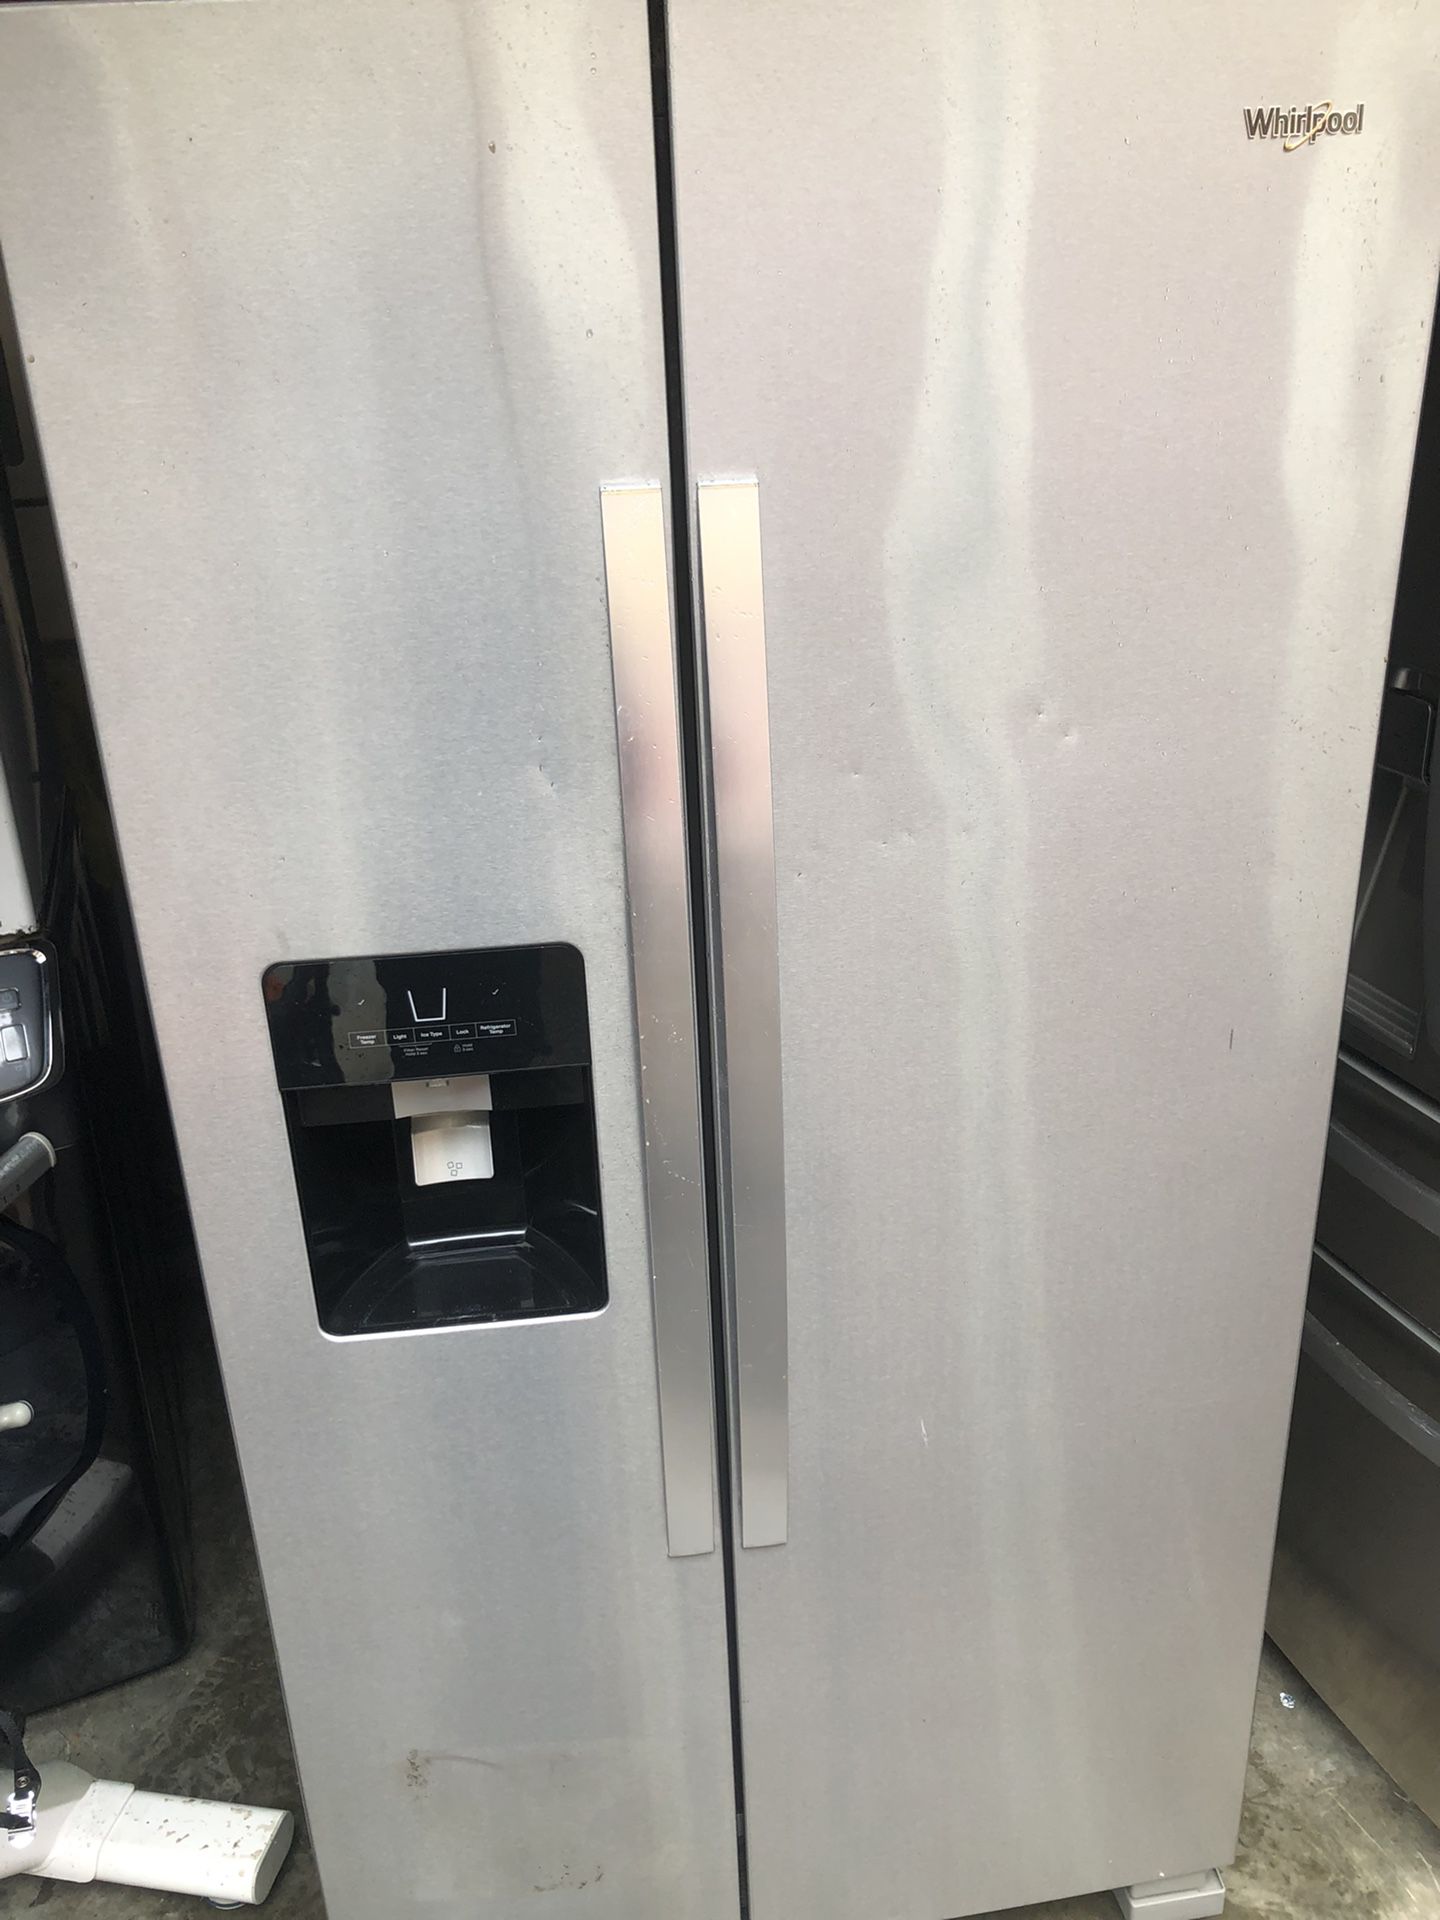 Whirlpool Stainless Steel Refrigerator With Water And Icemaker DELIVERY